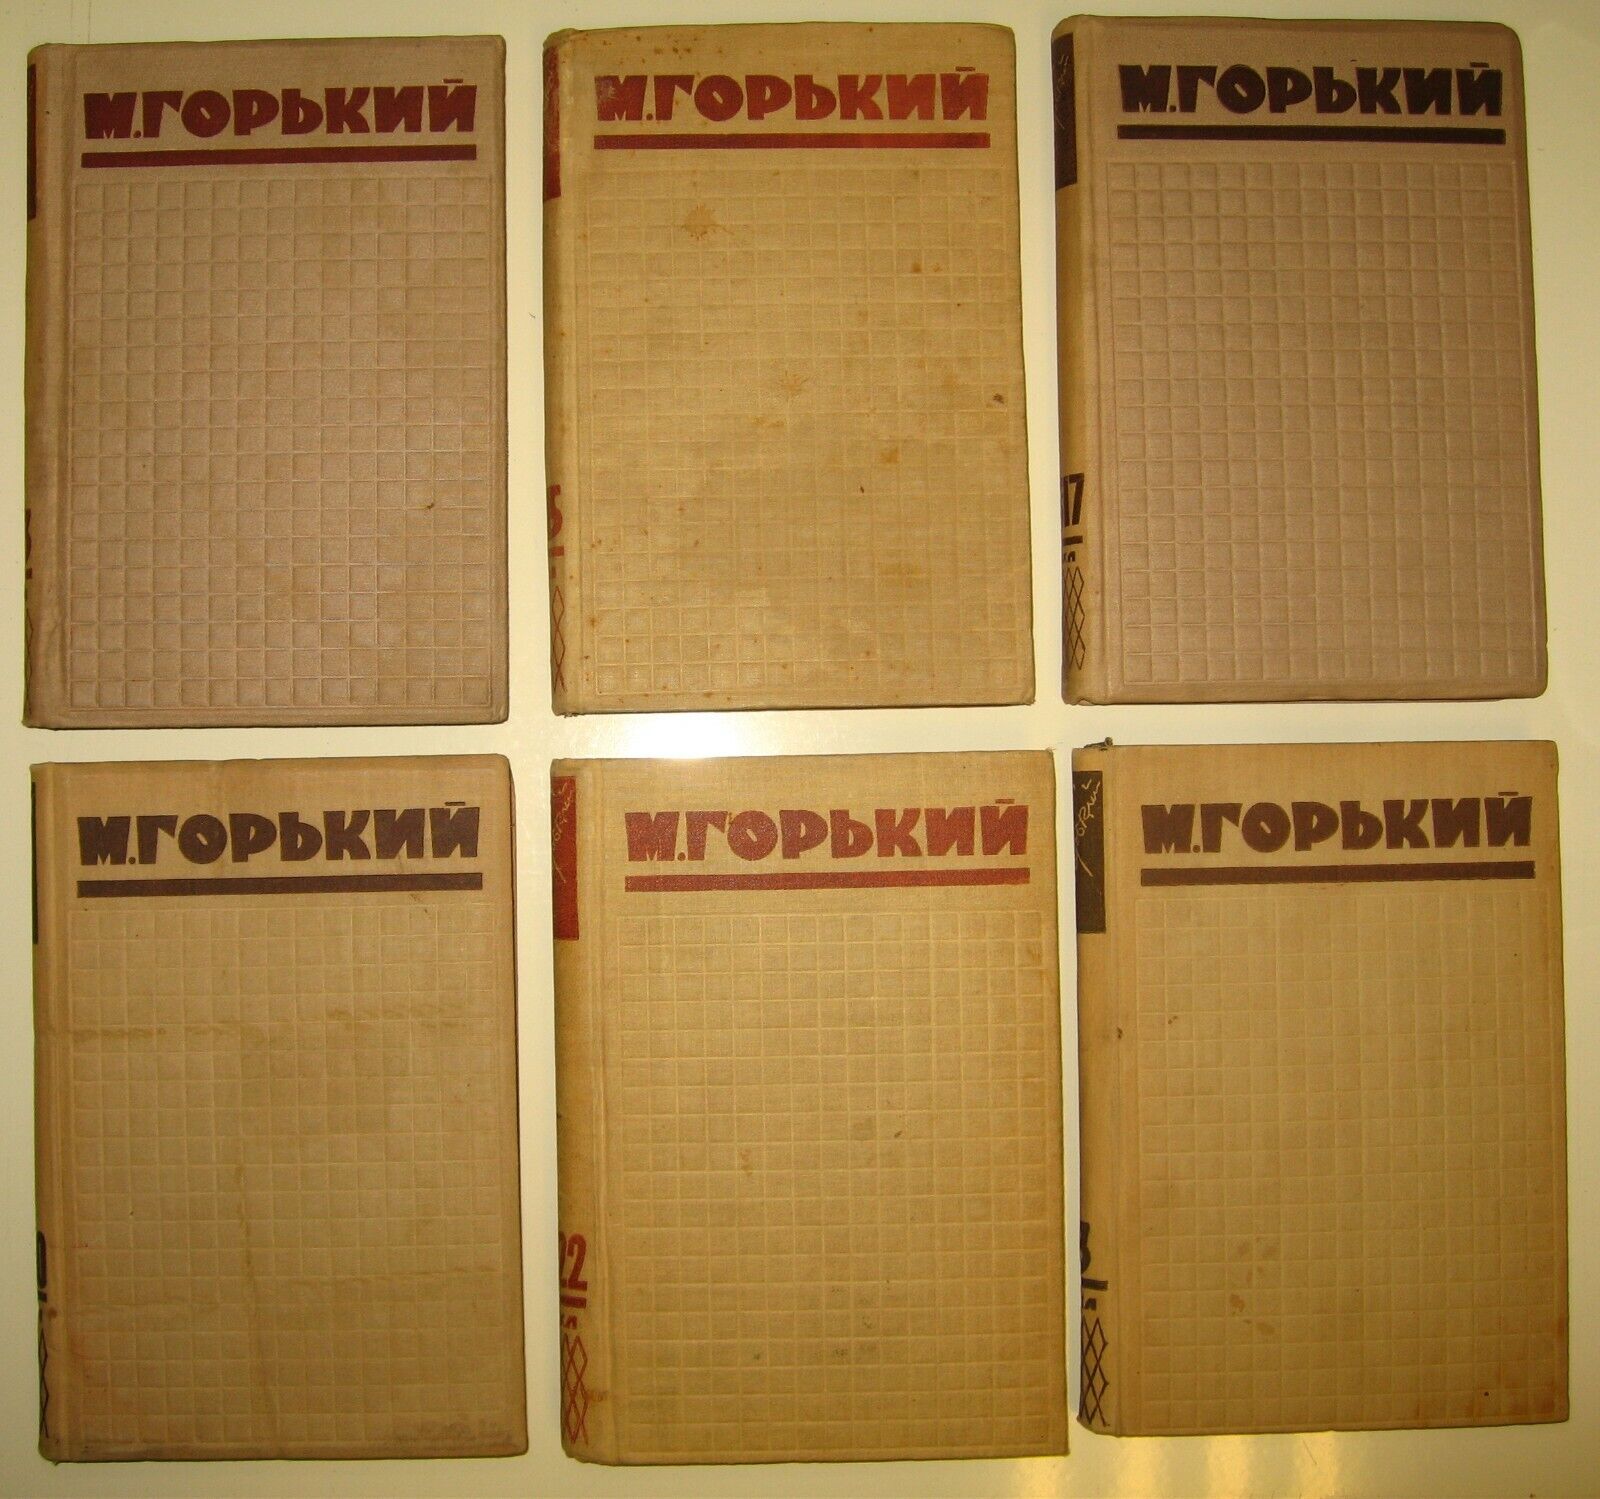 10839.Antique Russian Book: Gorky. Collected works complete set in 25 volumes.1933-34